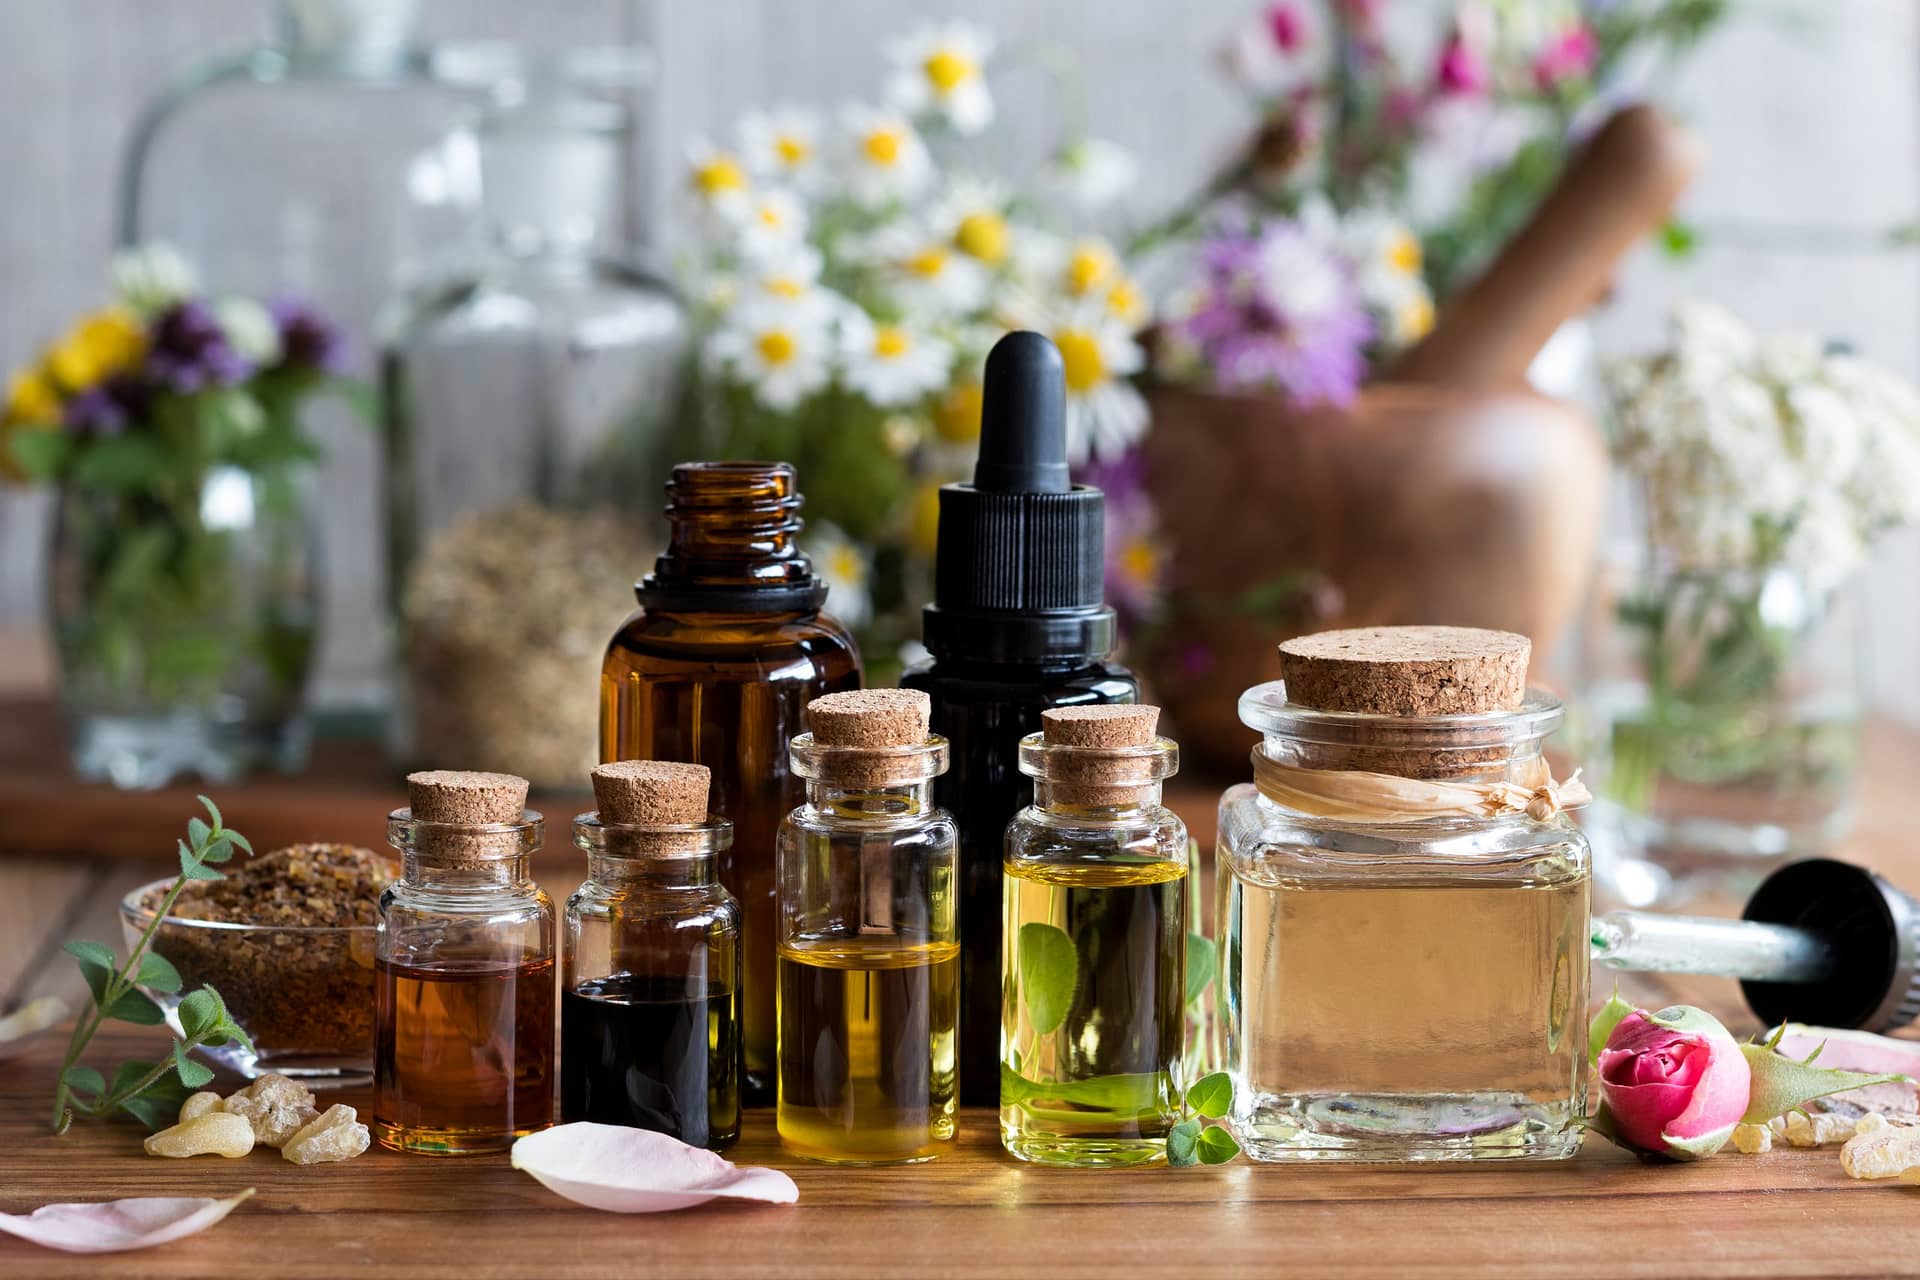 Dr. Z How To Buy Essential Oils